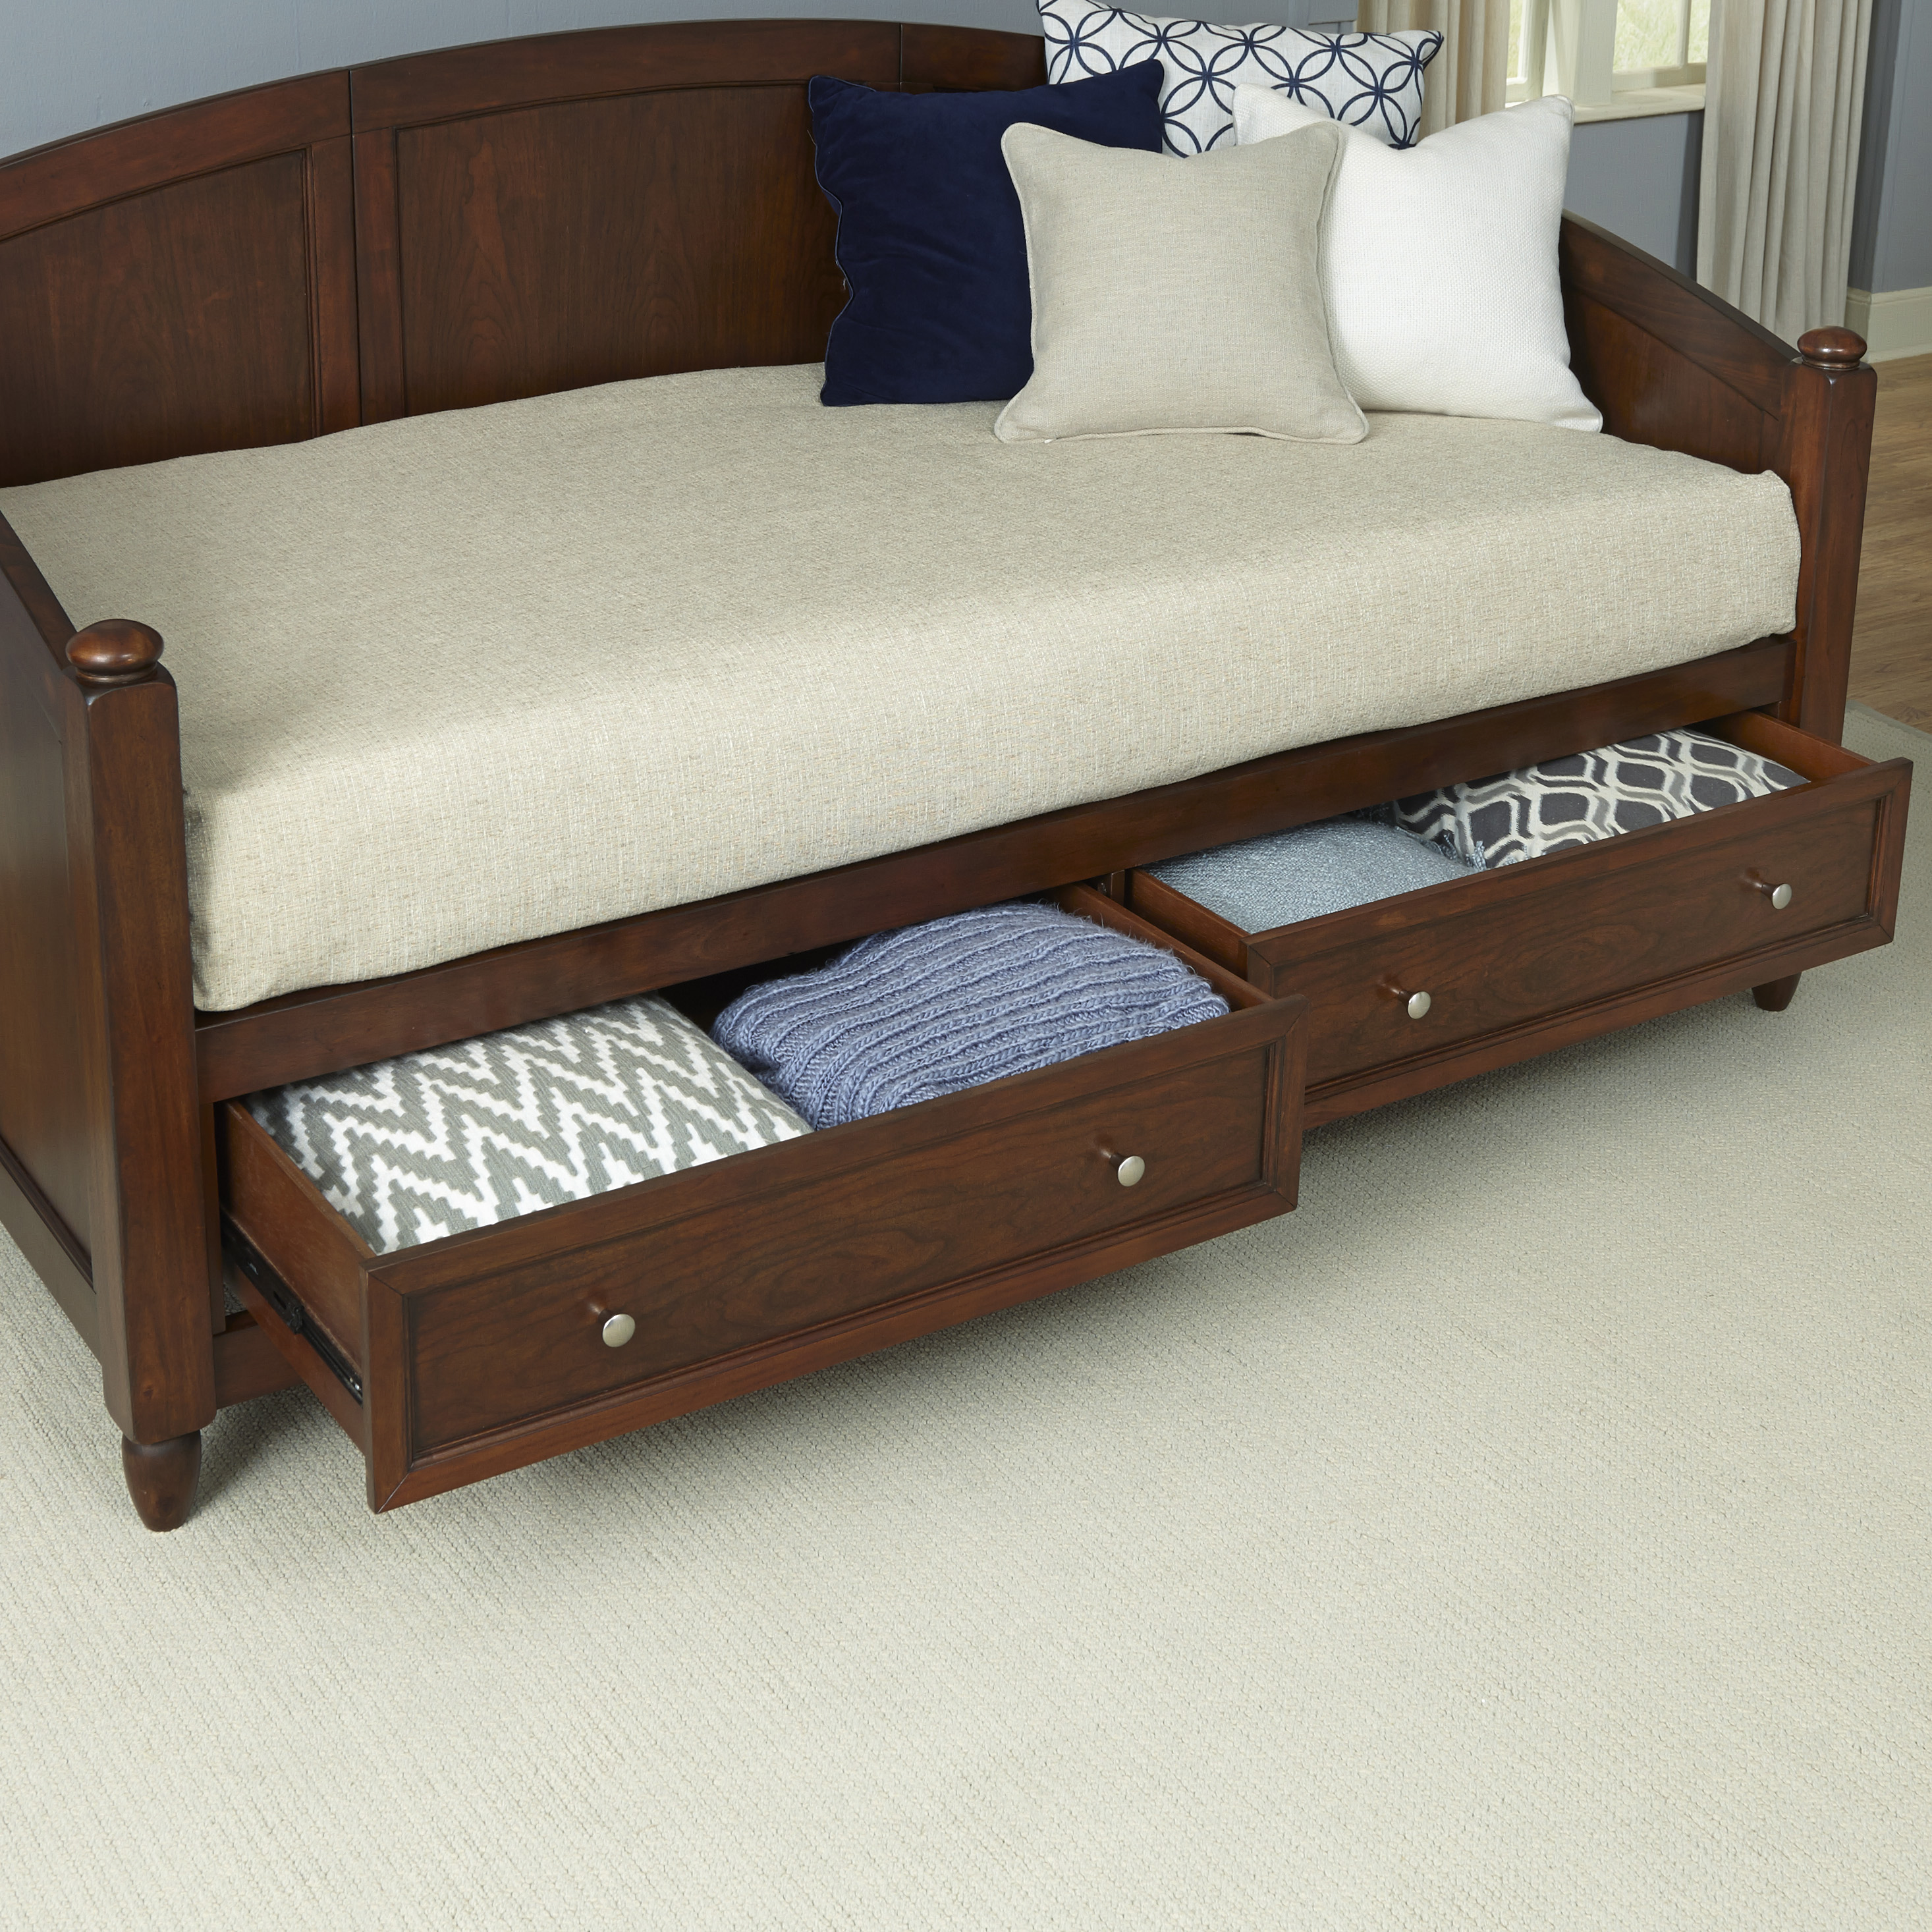 Home Styles Chesapeake Daybed   Home   Furniture   Bedroom Furniture